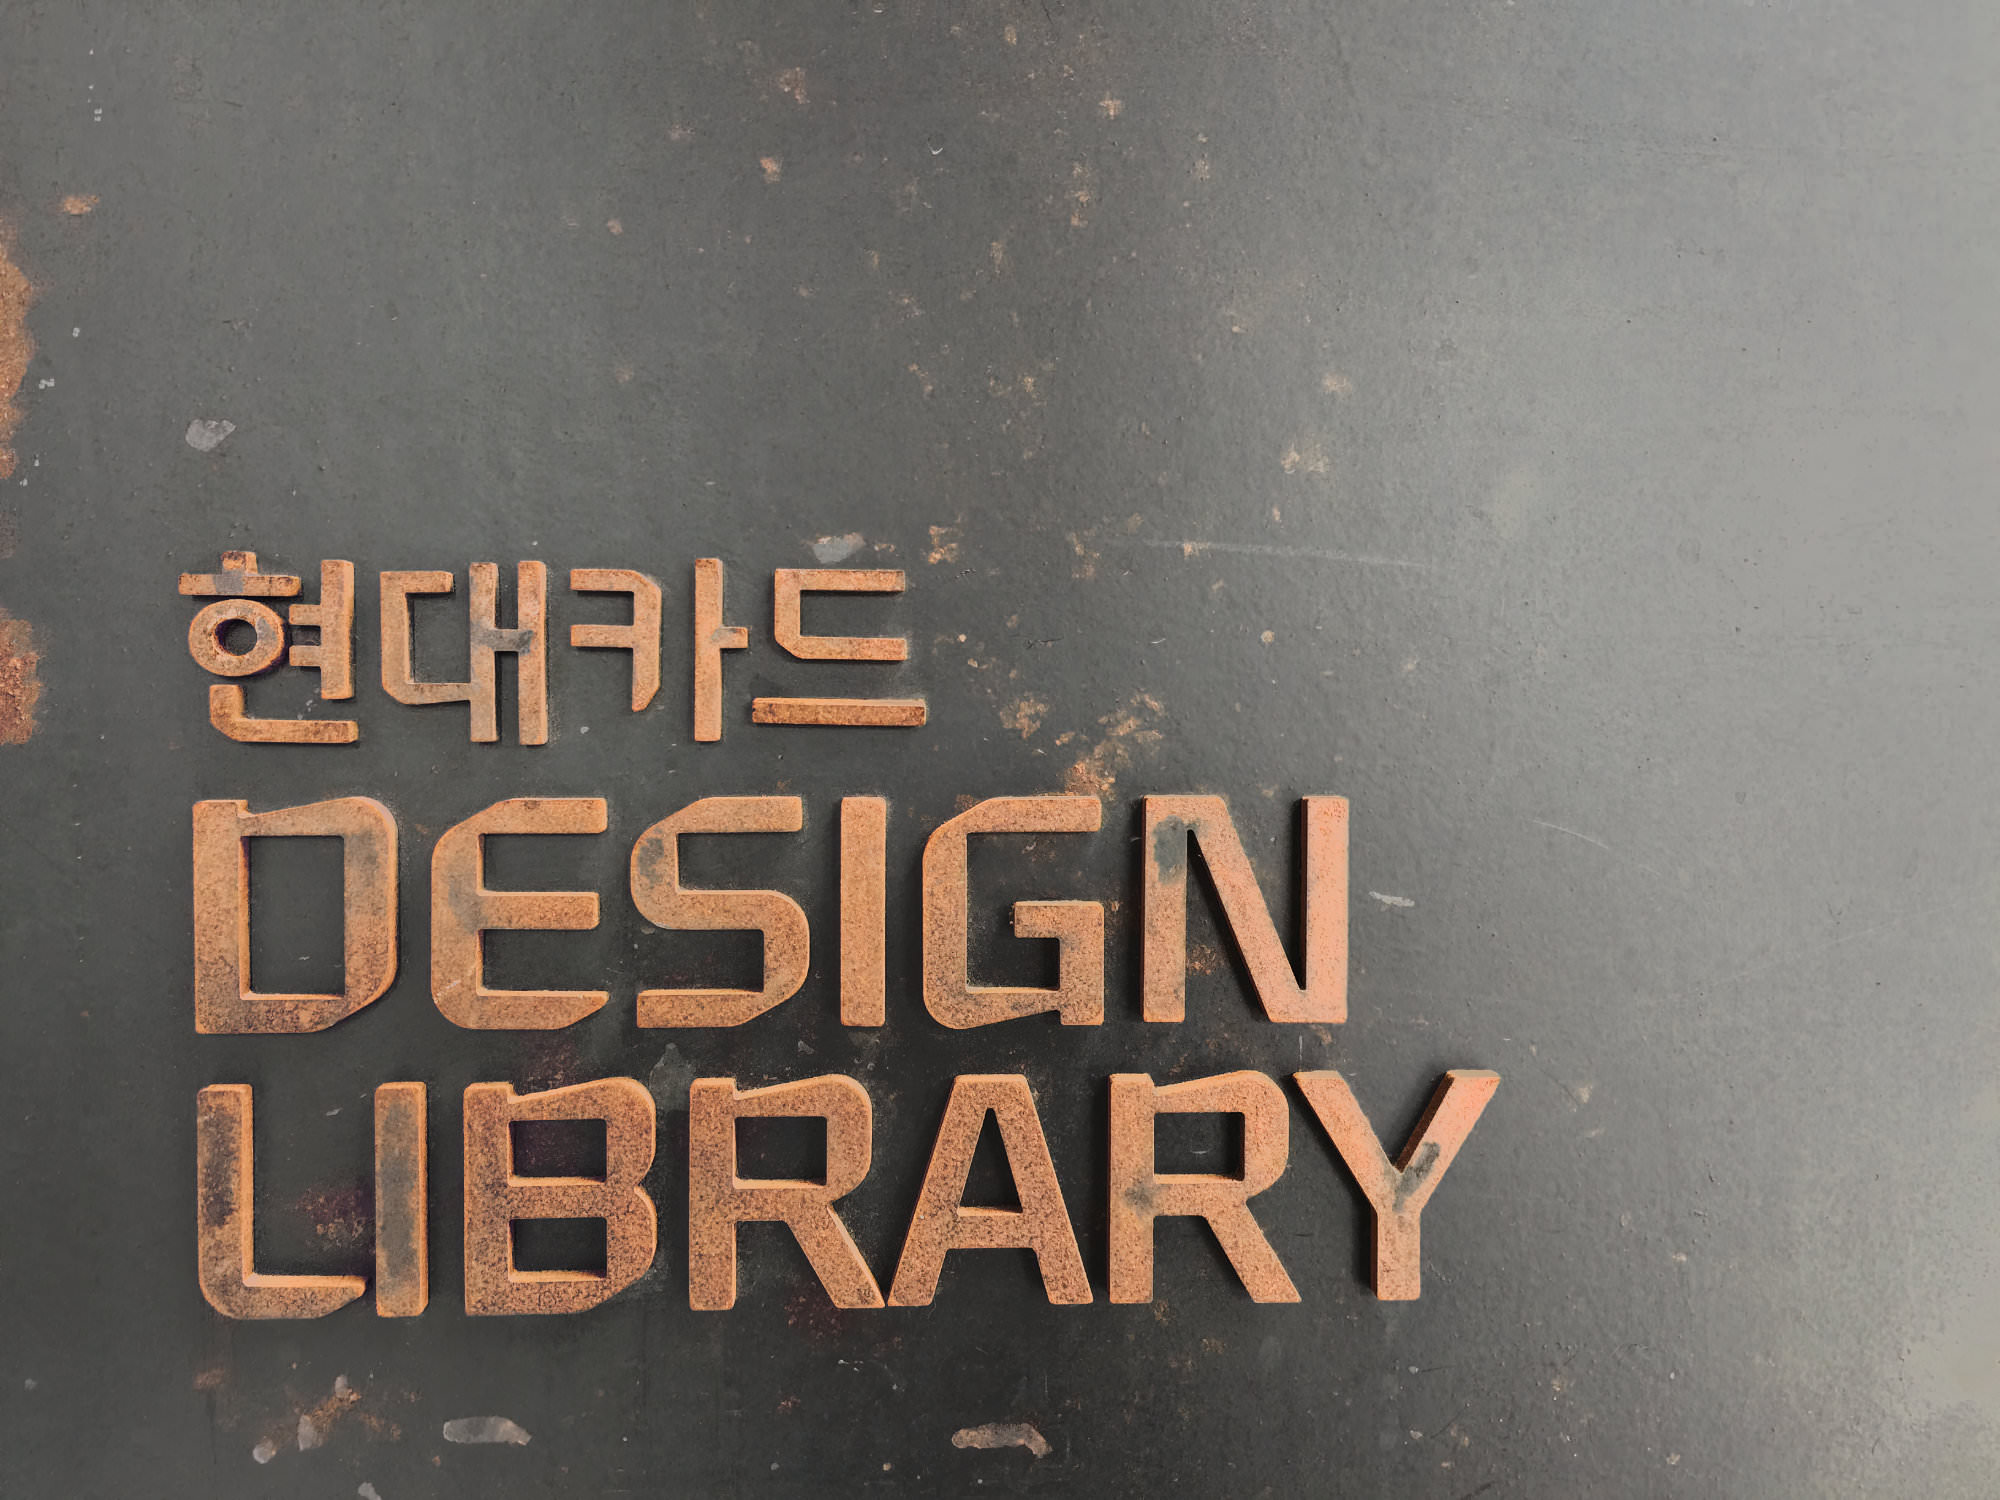 Hyundai Card – Signage at the company headquarters leading to the inhouse Design Library